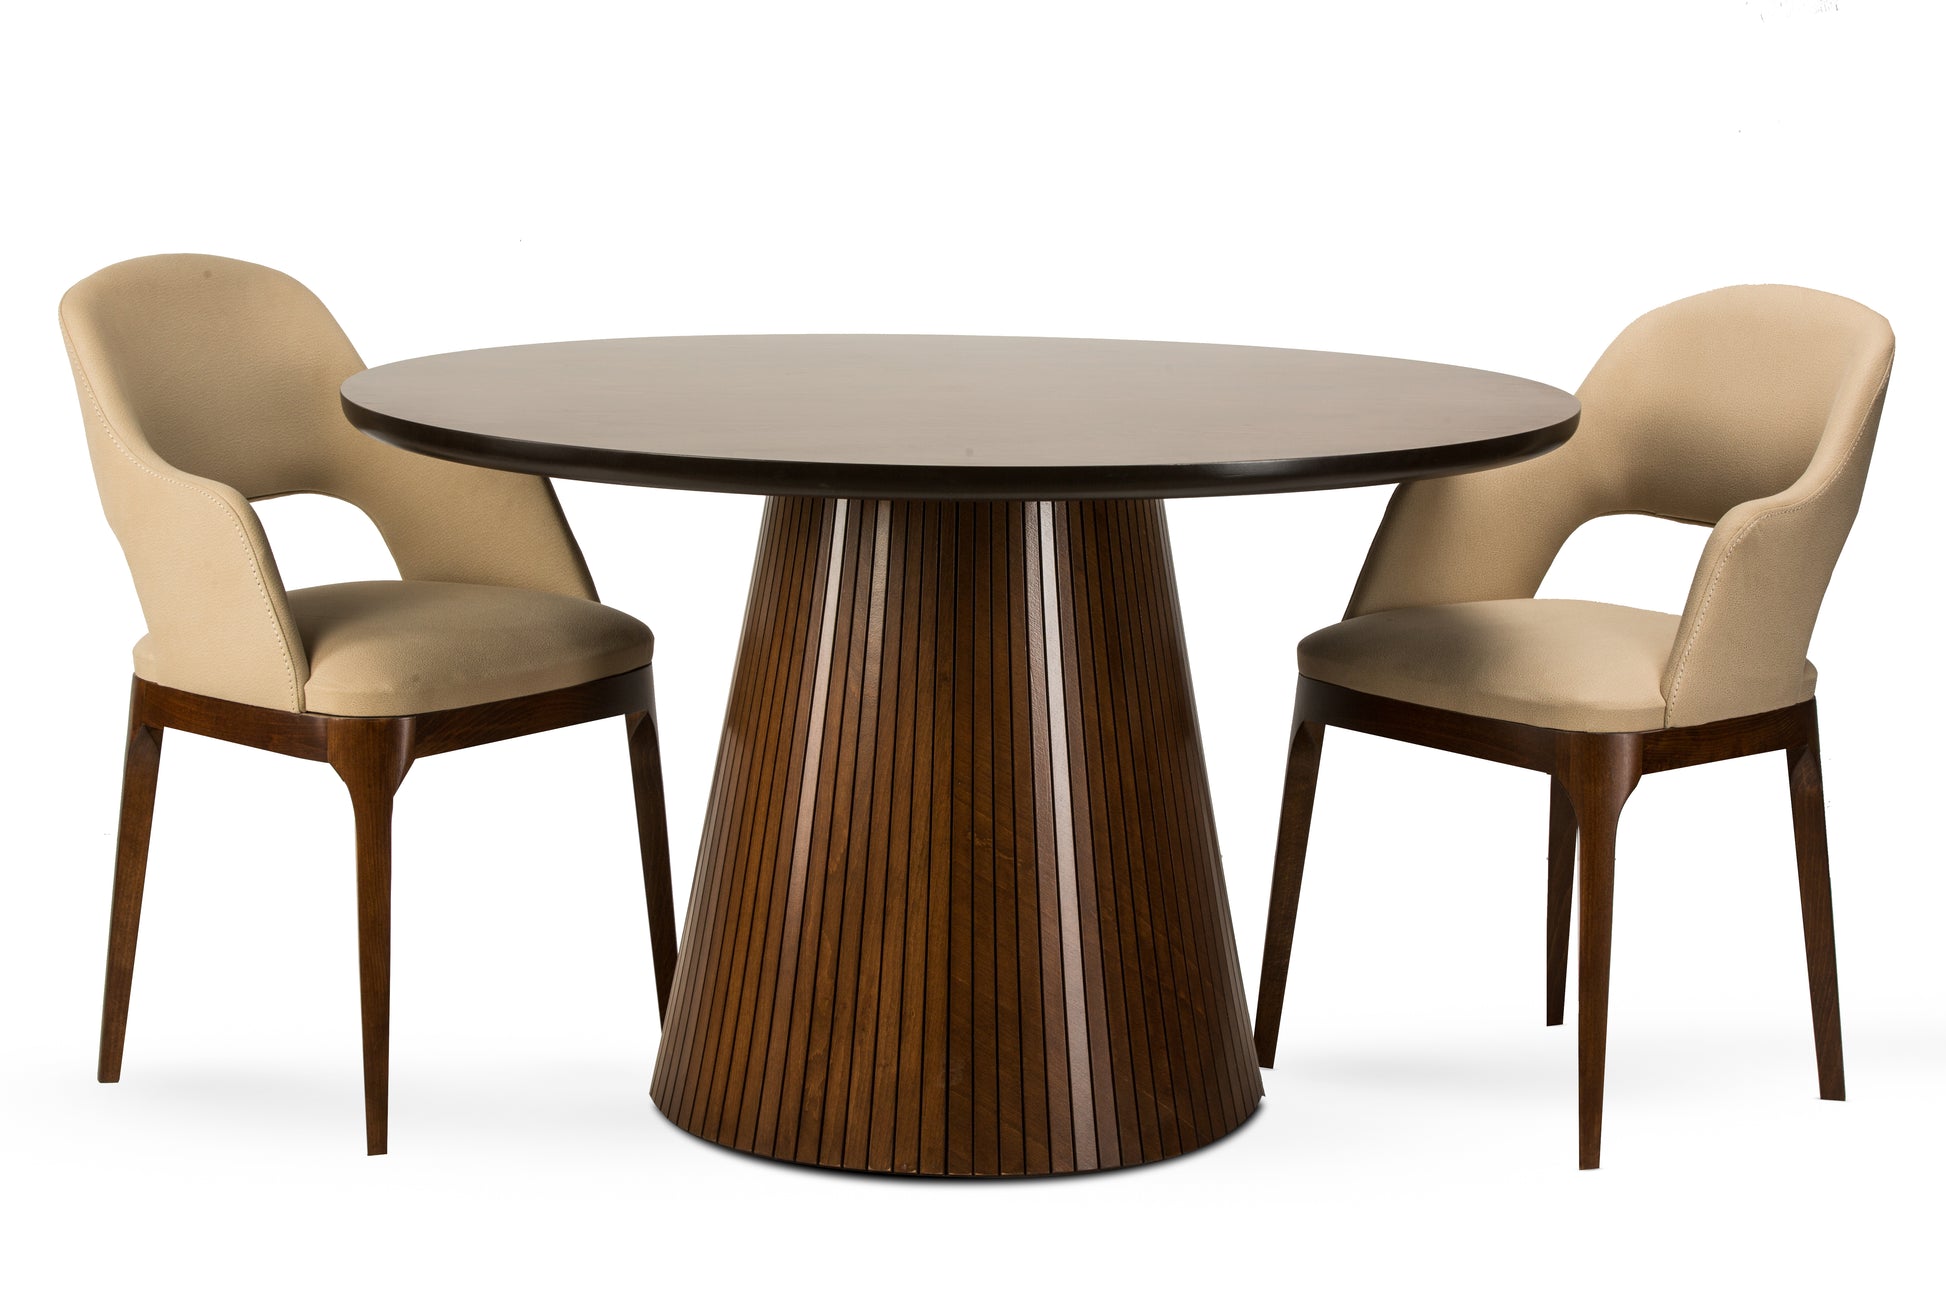 Gather Around! Modern, Rustic & Extendable Dining Tables at like.furniture